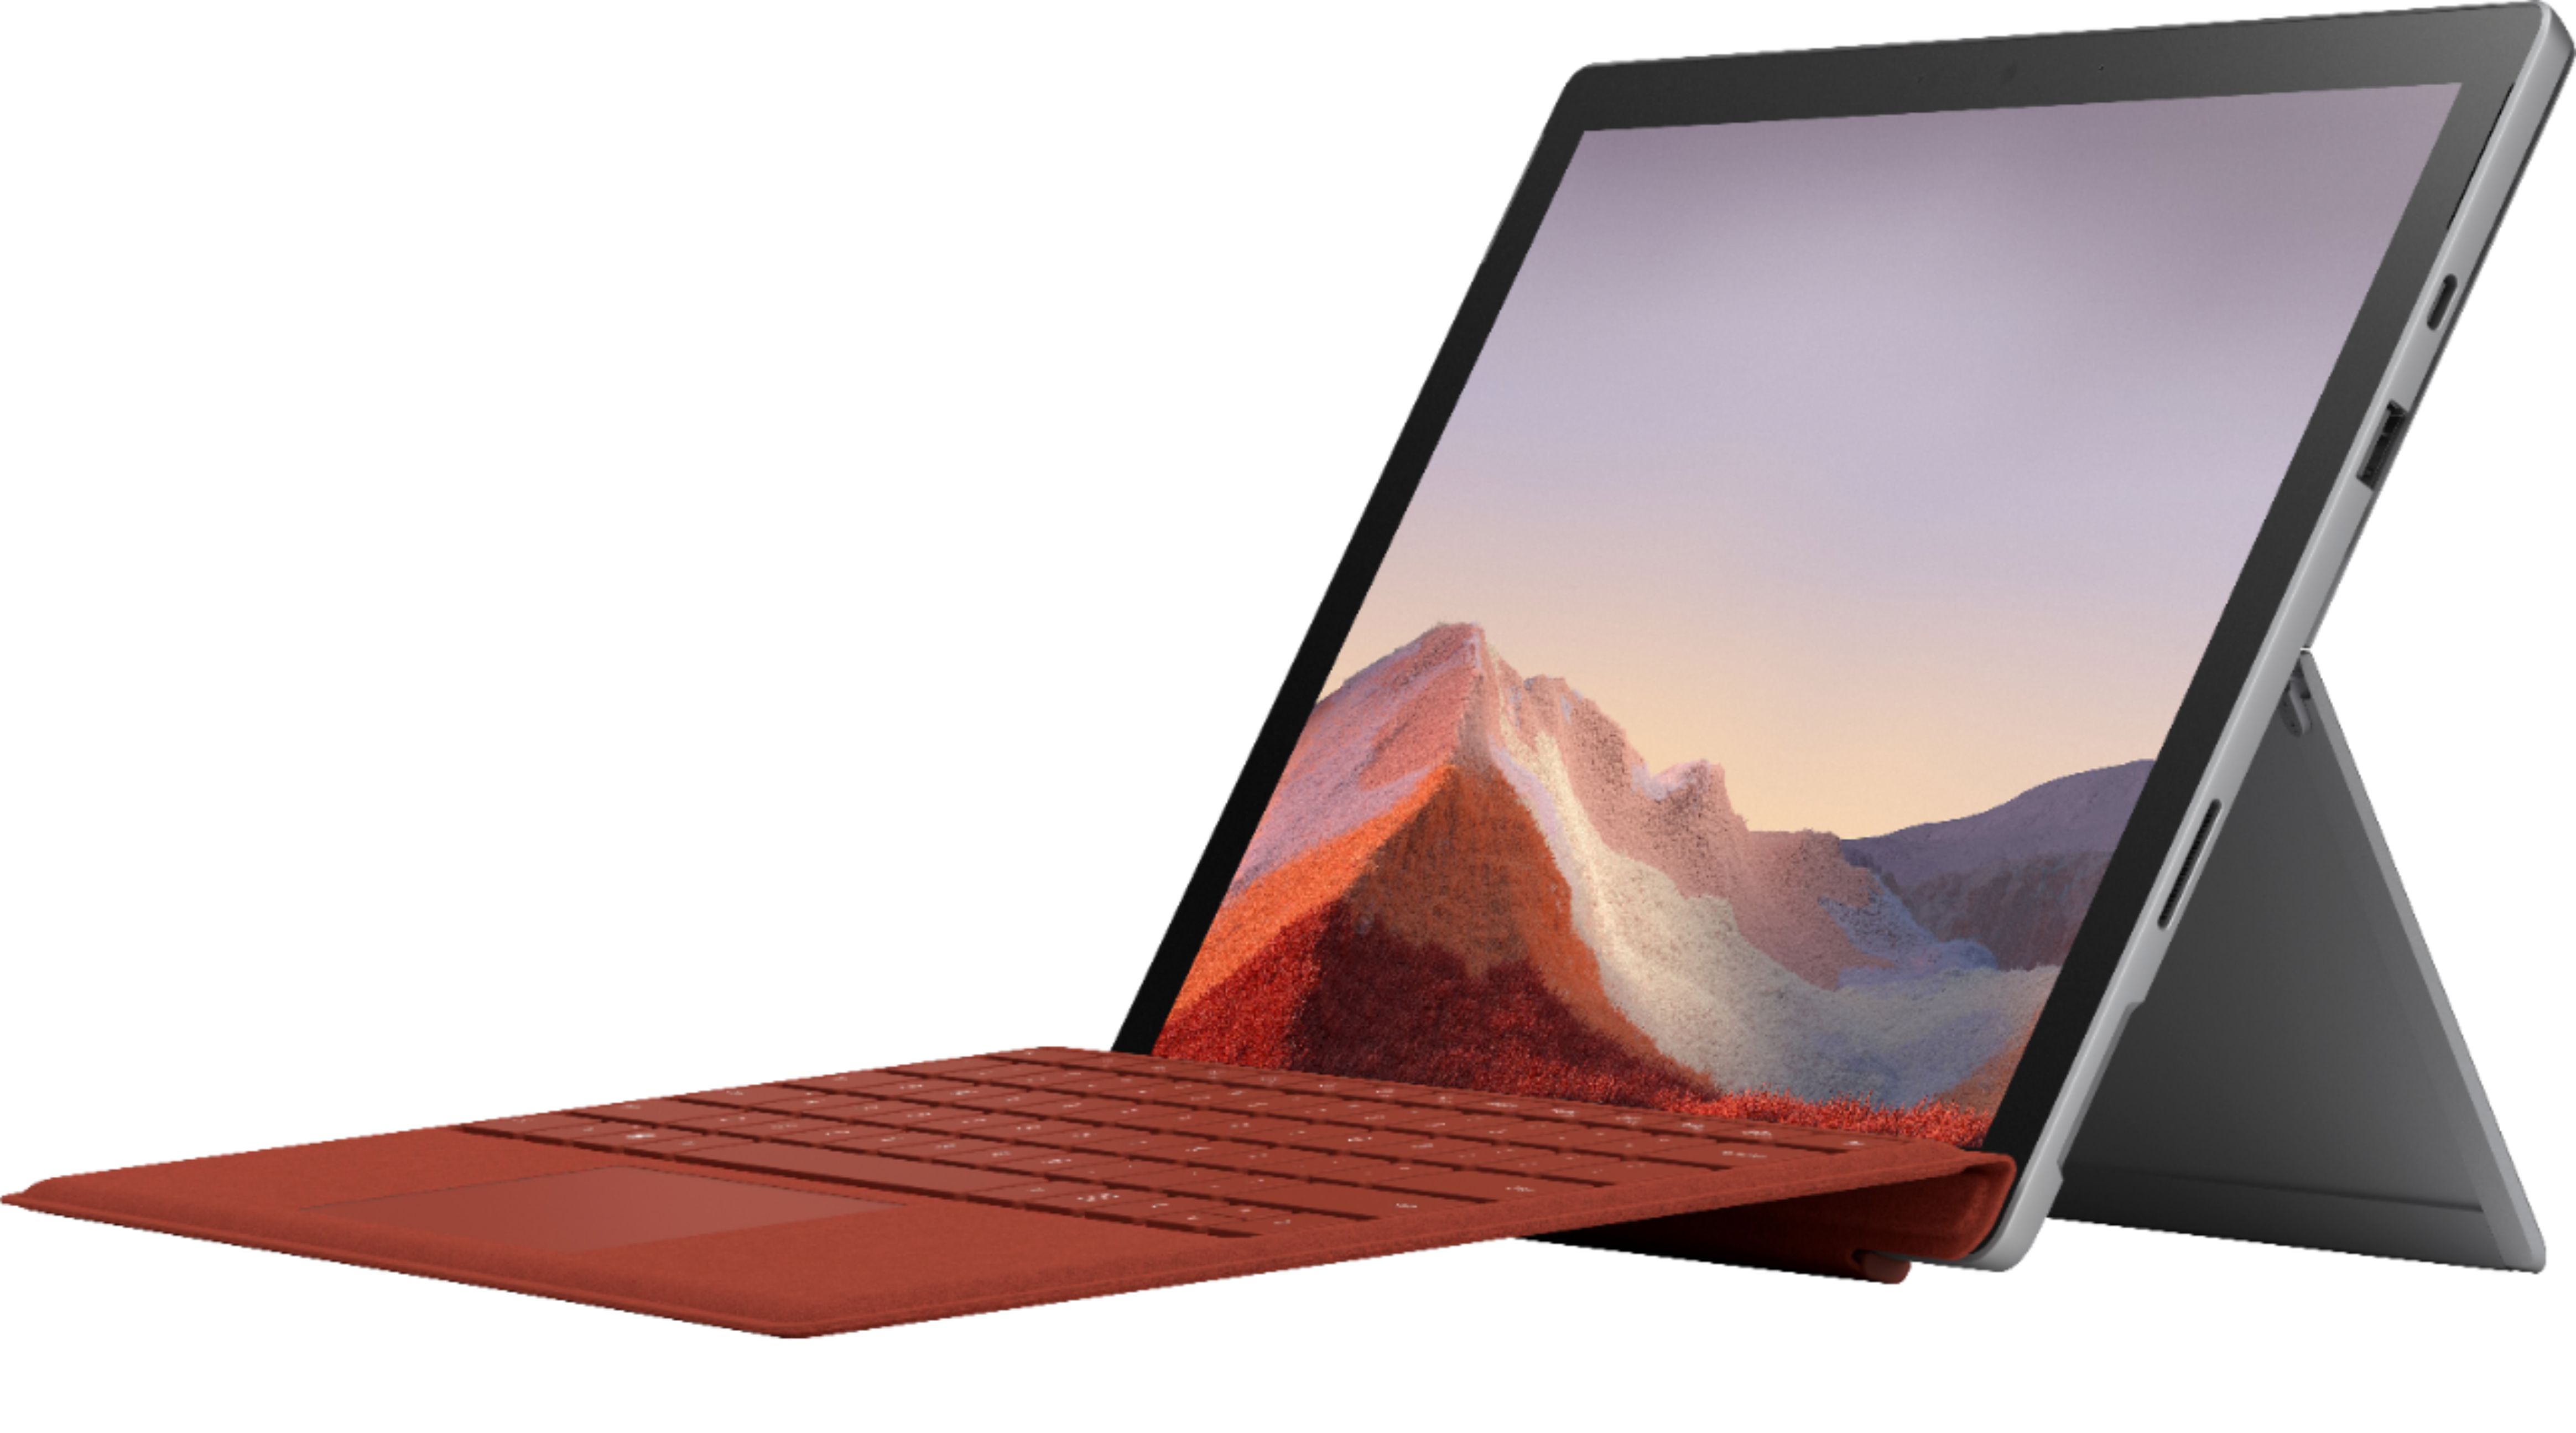 Microsoft - Surface Pro 7 - 12.3" Touch Screen - Intel Core i5 - 8GB Memory - 128GB SSD - Device Only (Latest Model) - Platinum $699.99 at Best Buy